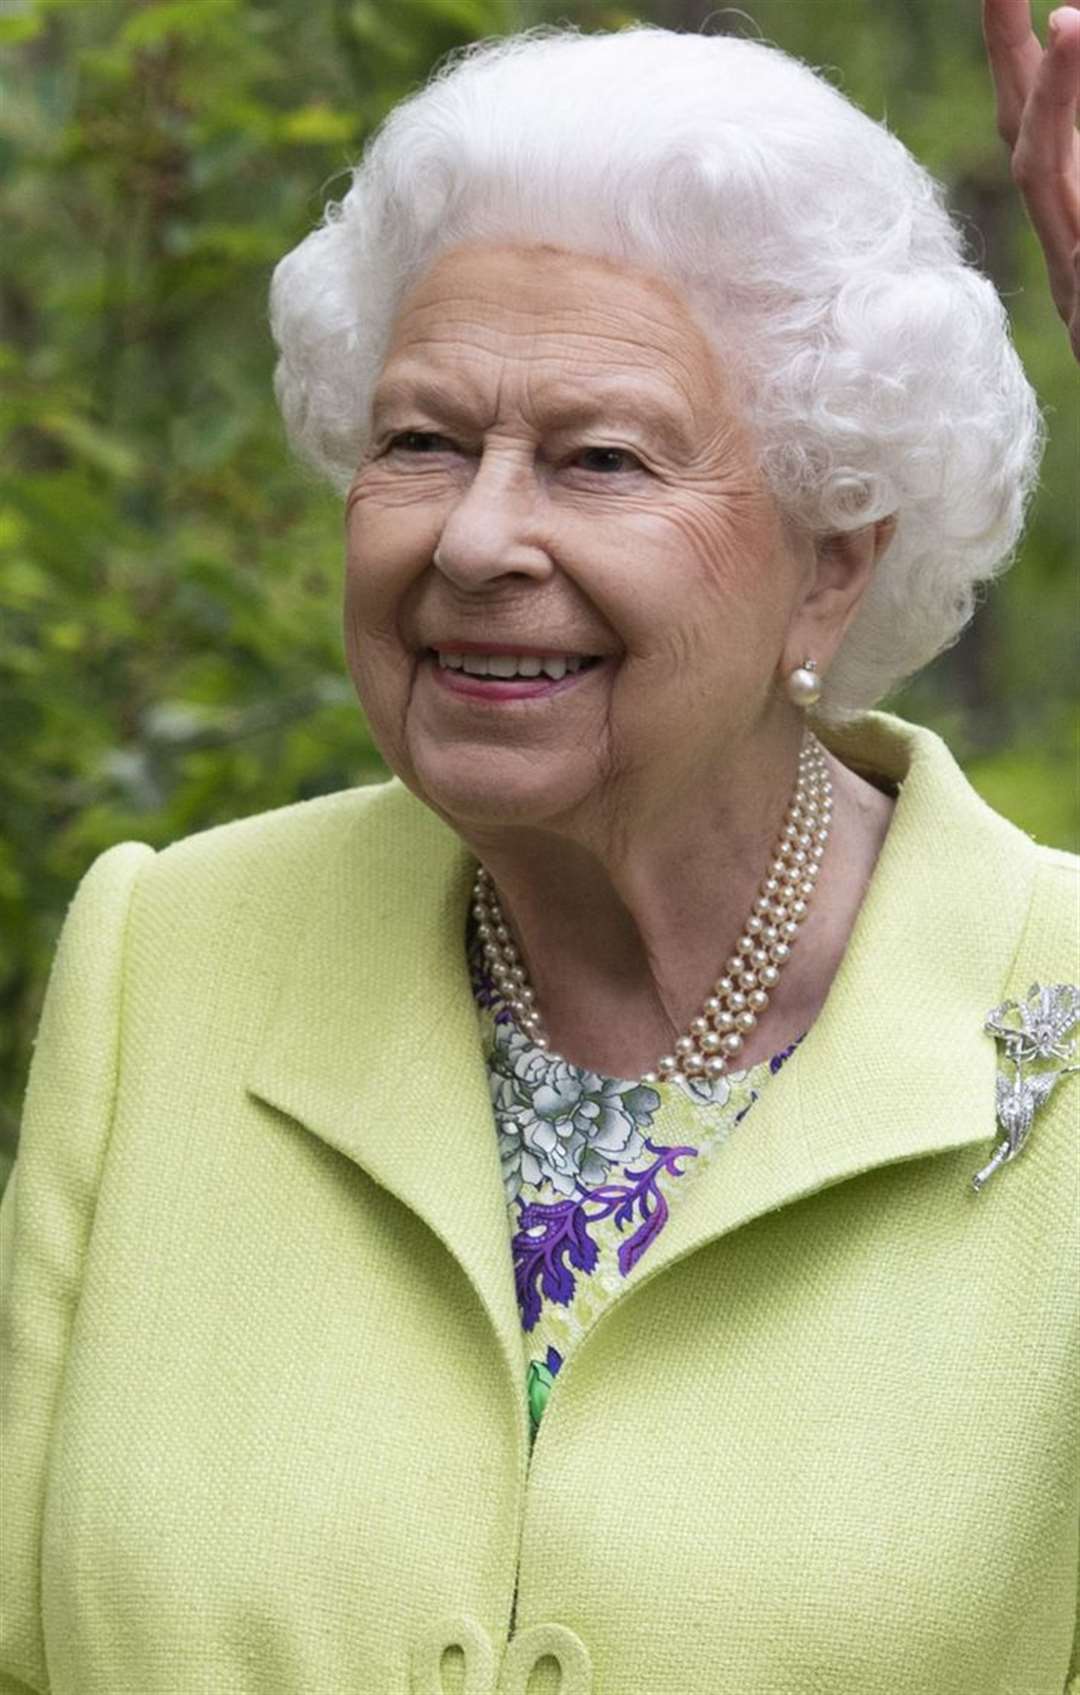 Queen will address the nation on Sunday. Picture: Geoff Pugh/PA Wire